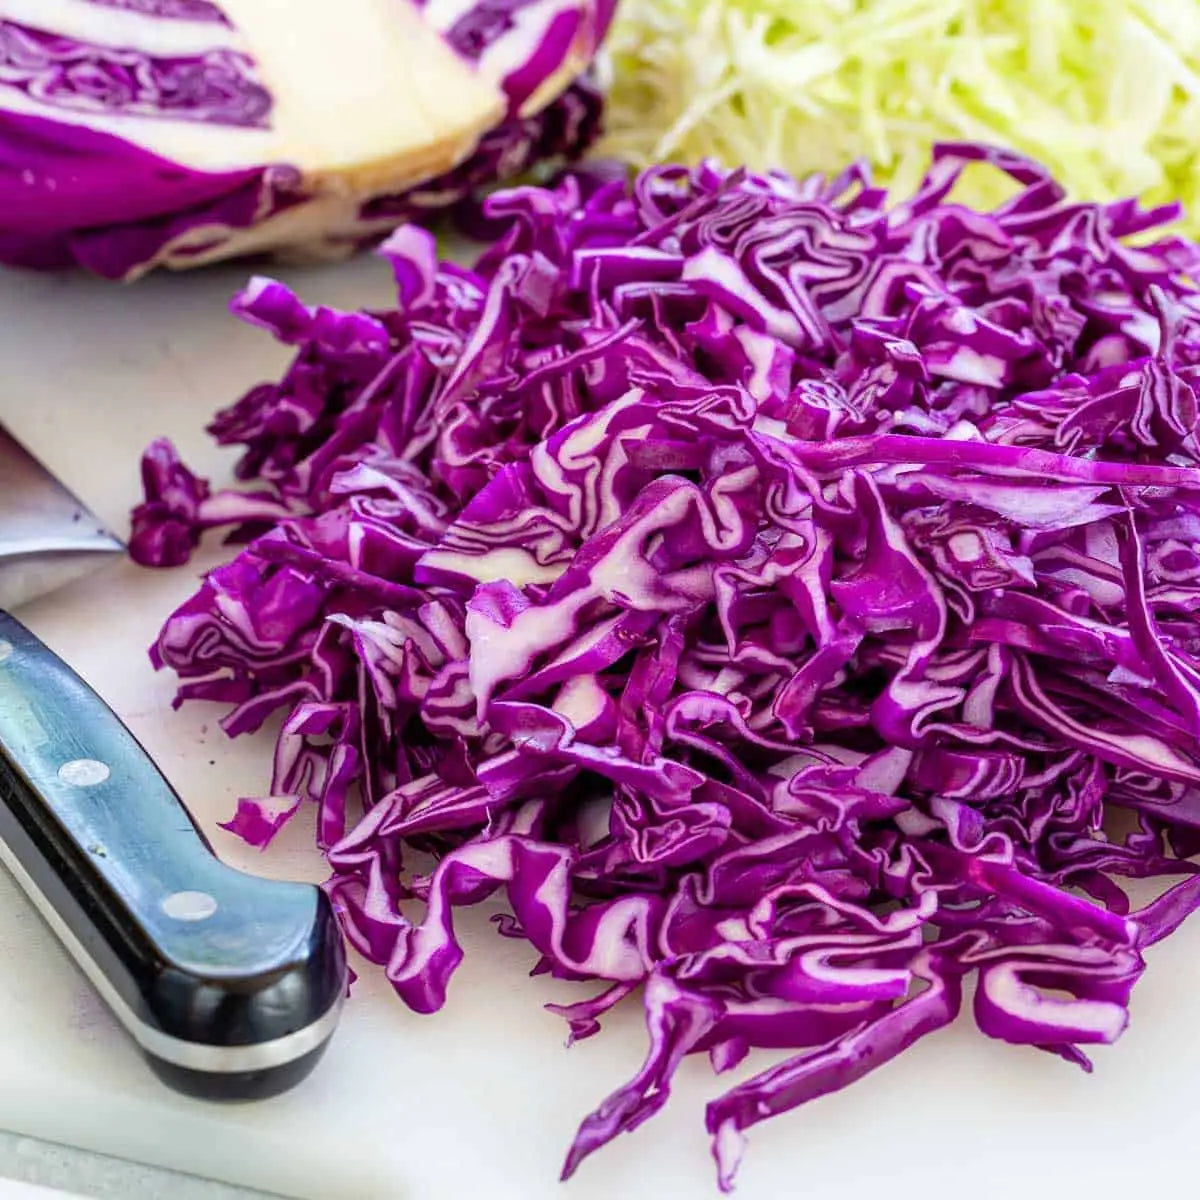 How to Cut Cabbage - Jessica Gavin